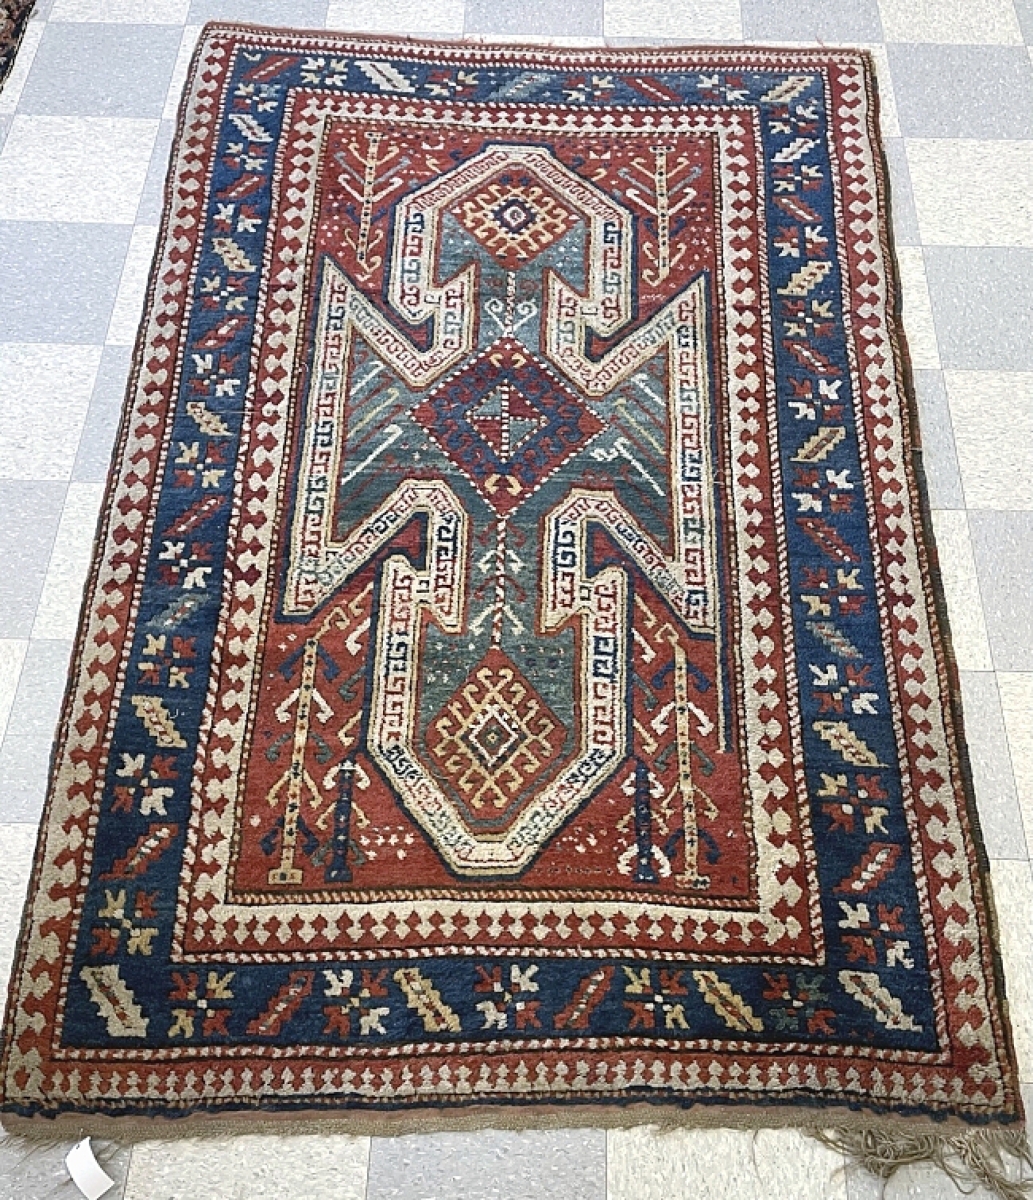 Included in the sale were an assortment of Oriental rugs that had seen foot traffic in Camp Manor. Leading all was this hand-woven Oriental area rug, 50 by 90 inches, in good overall condition and colors, which sold for $11,500.